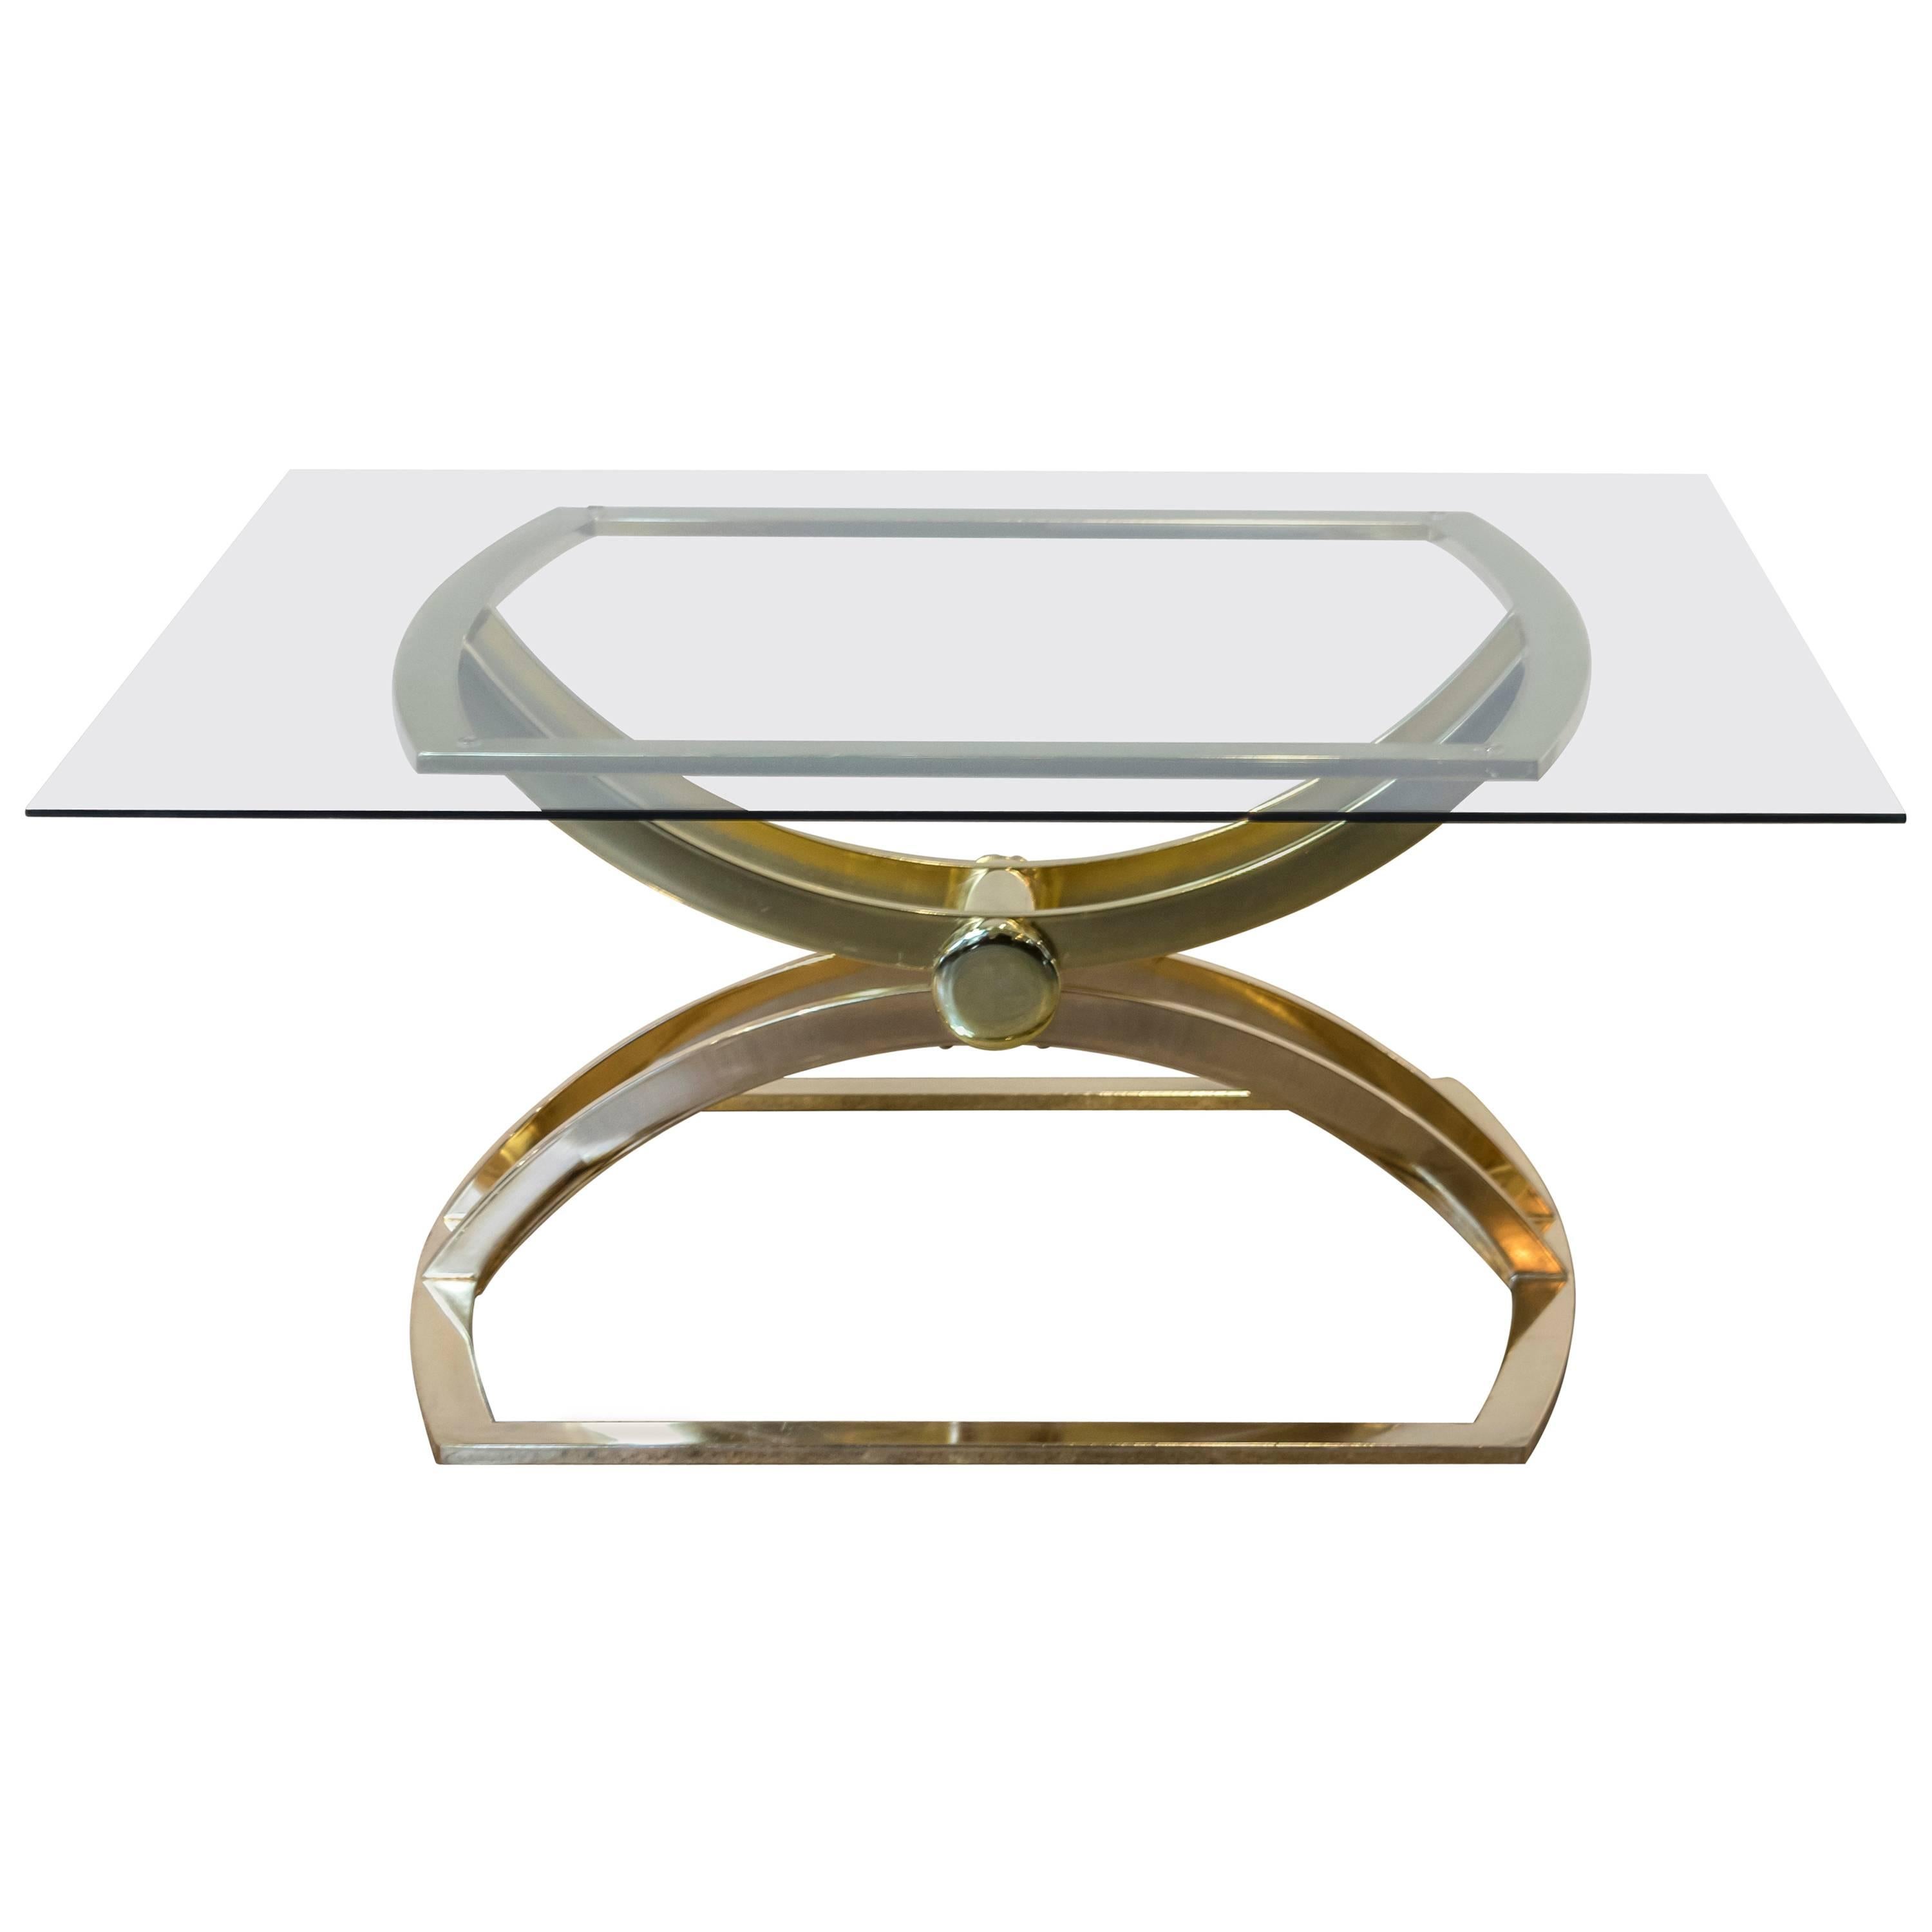 1970s Sculptural Brass-Plated Coffee or Cocktail Table For Sale